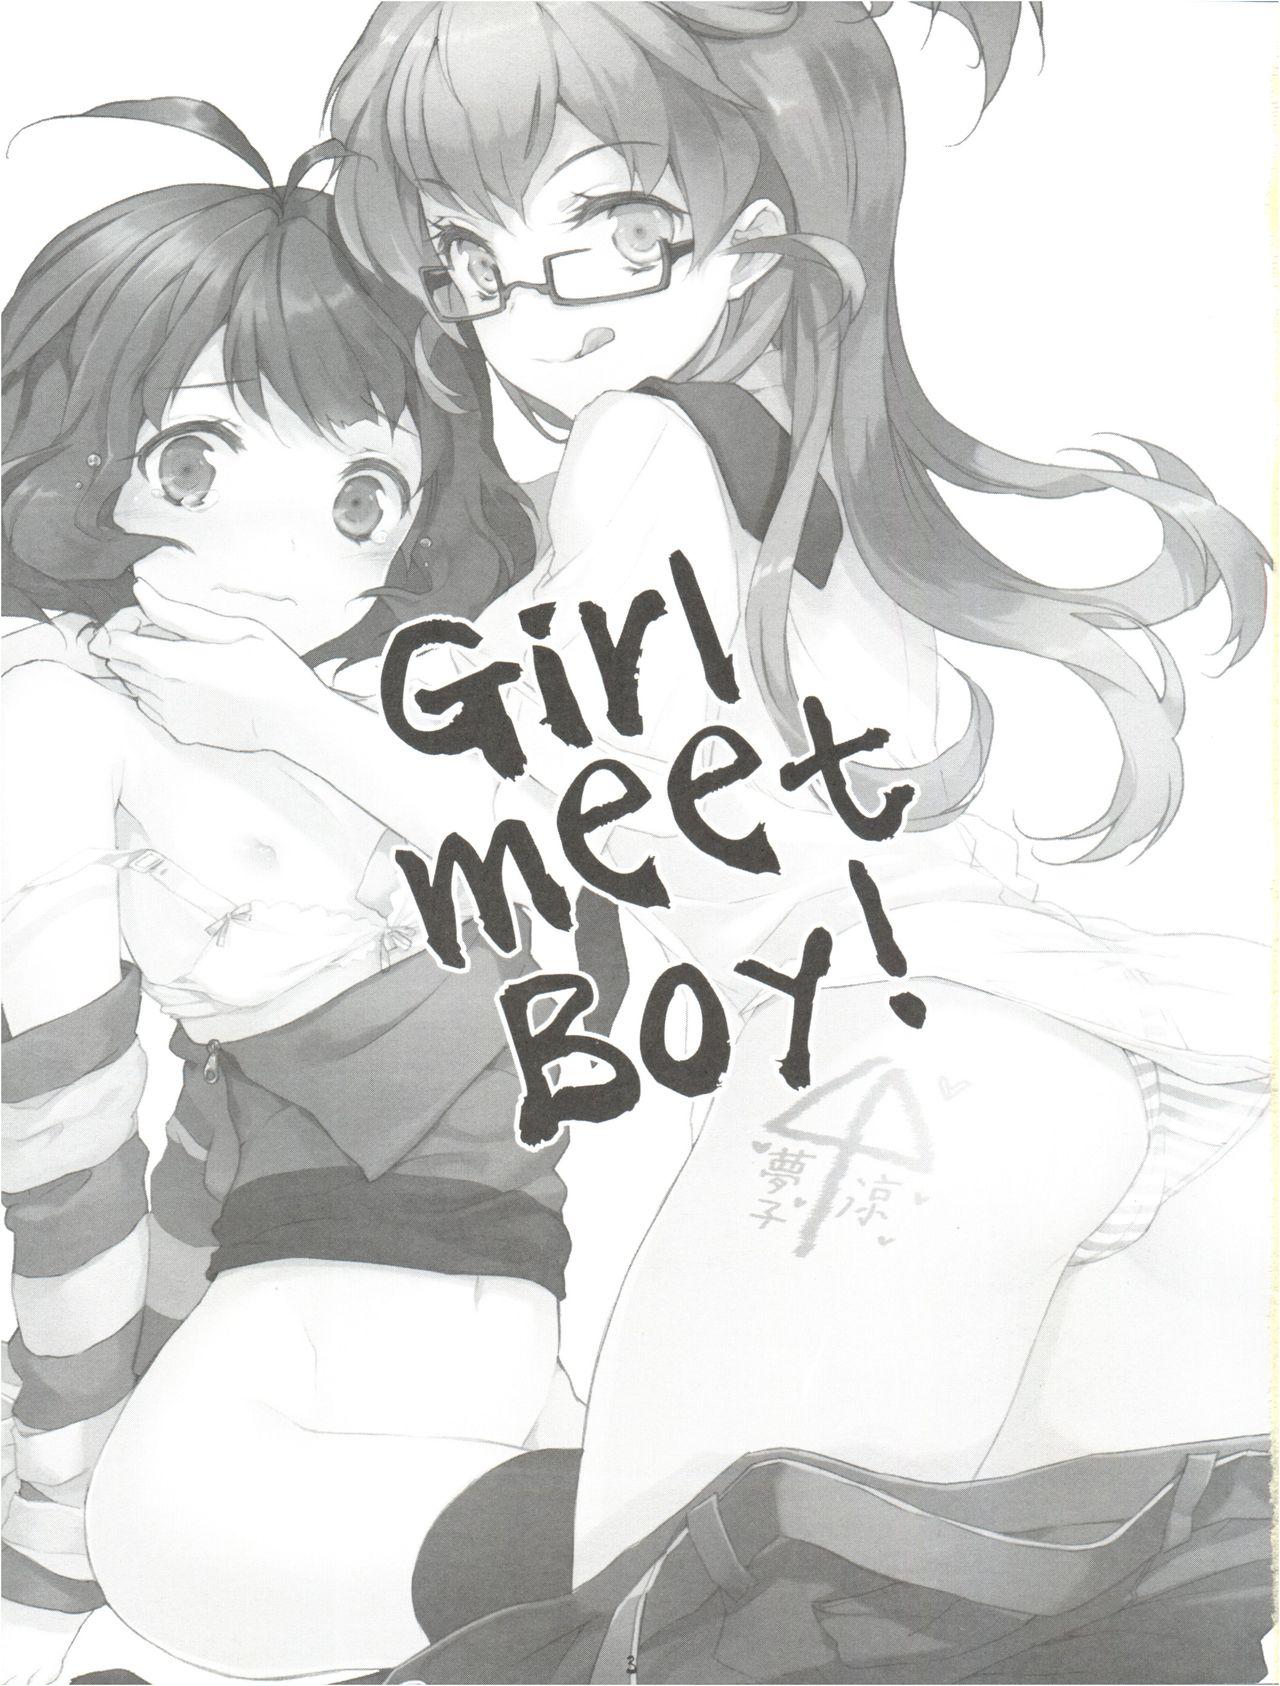 Freaky IM@SWEETS 3 GIRL MEET BOY! - The idolmaster Massage Sex - Page 5